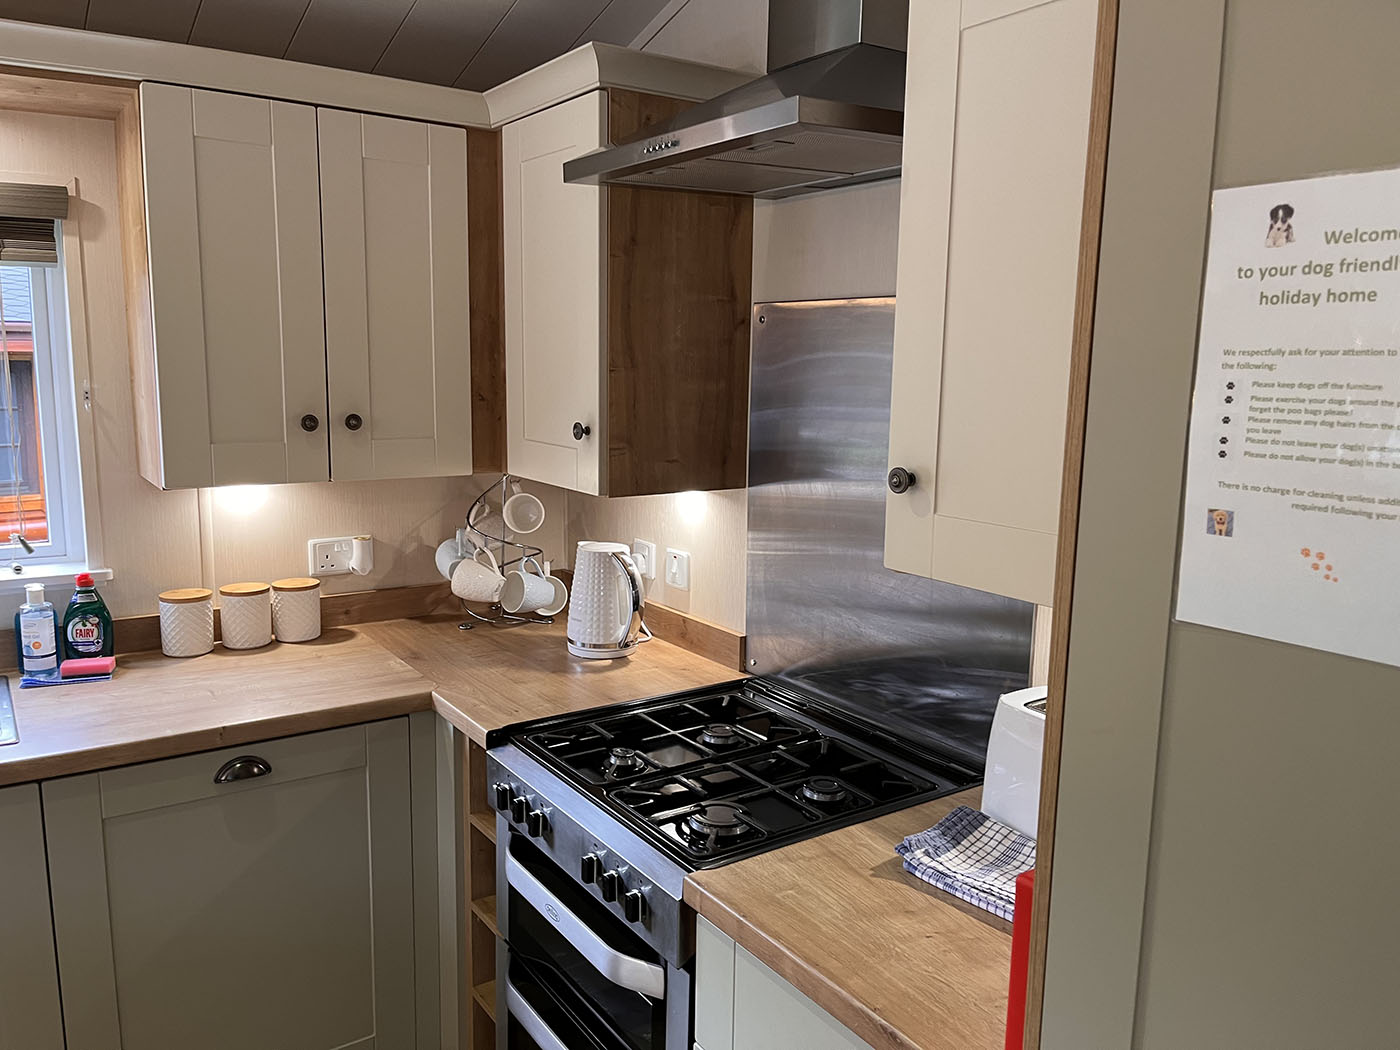 Griffon Lodge Holiday Home in Felmoor Park Kitchen